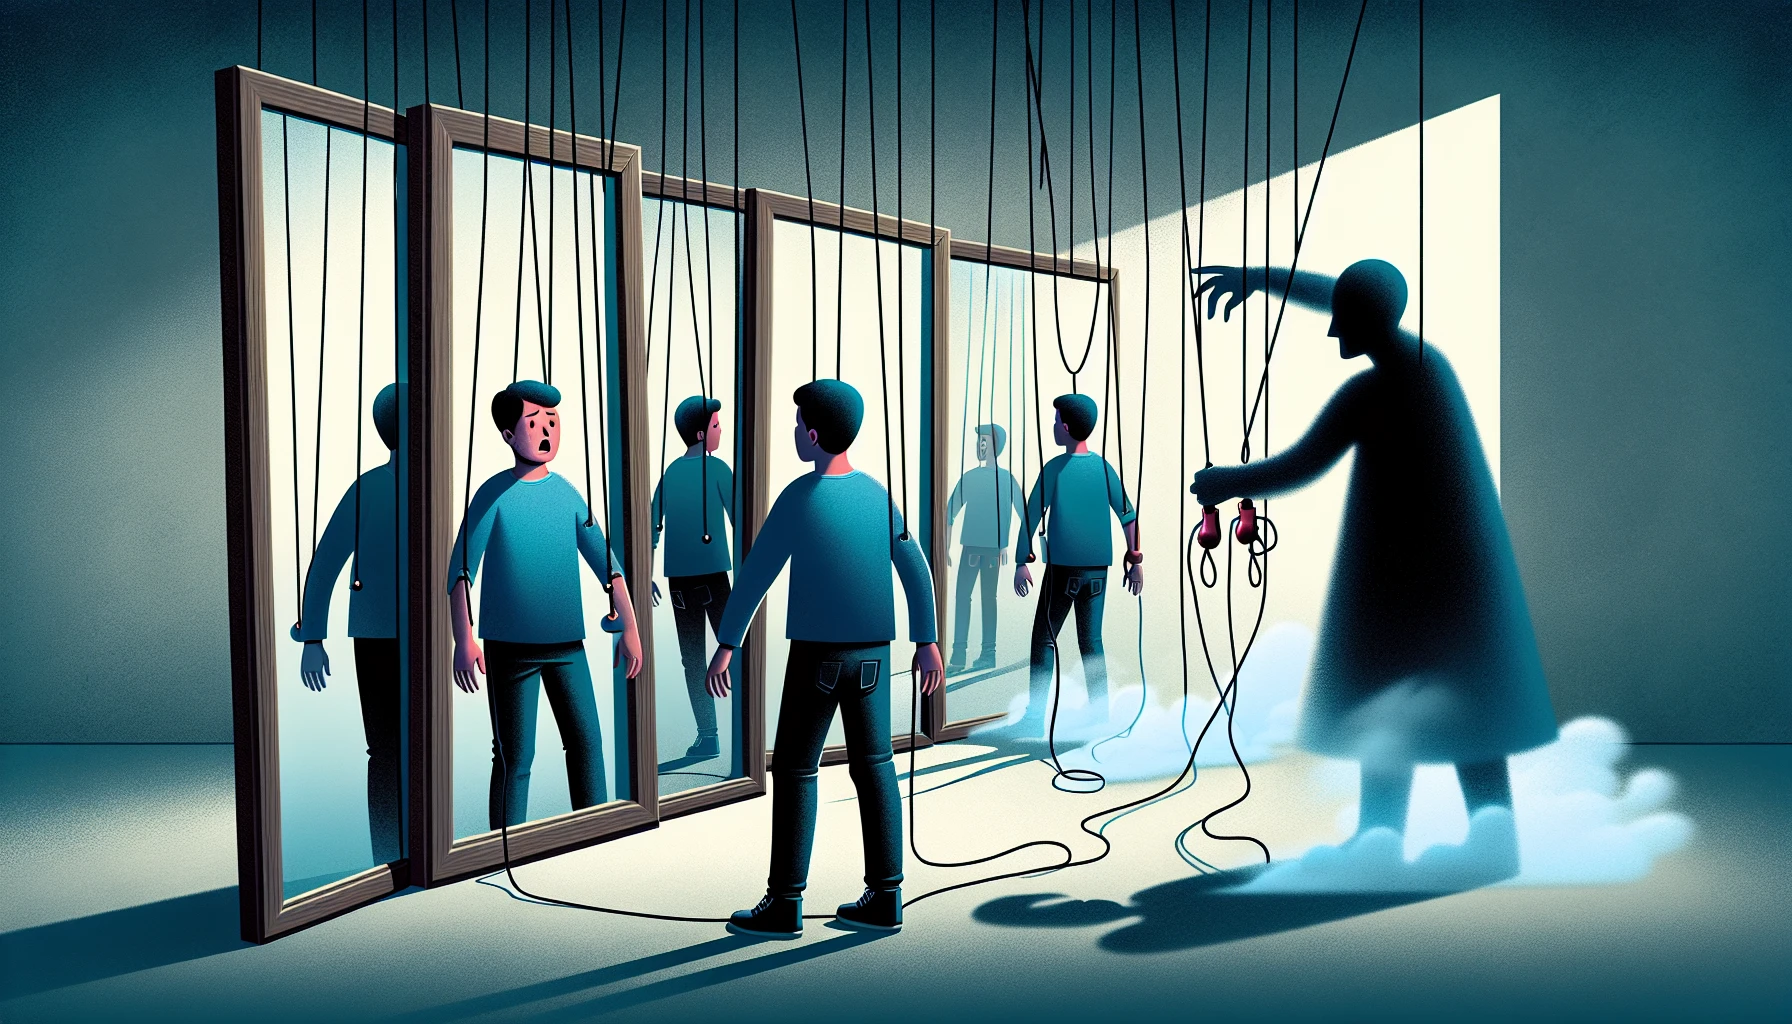 Illustration depicting a person being manipulated and confused by deceptive tactics, representing gaslighting